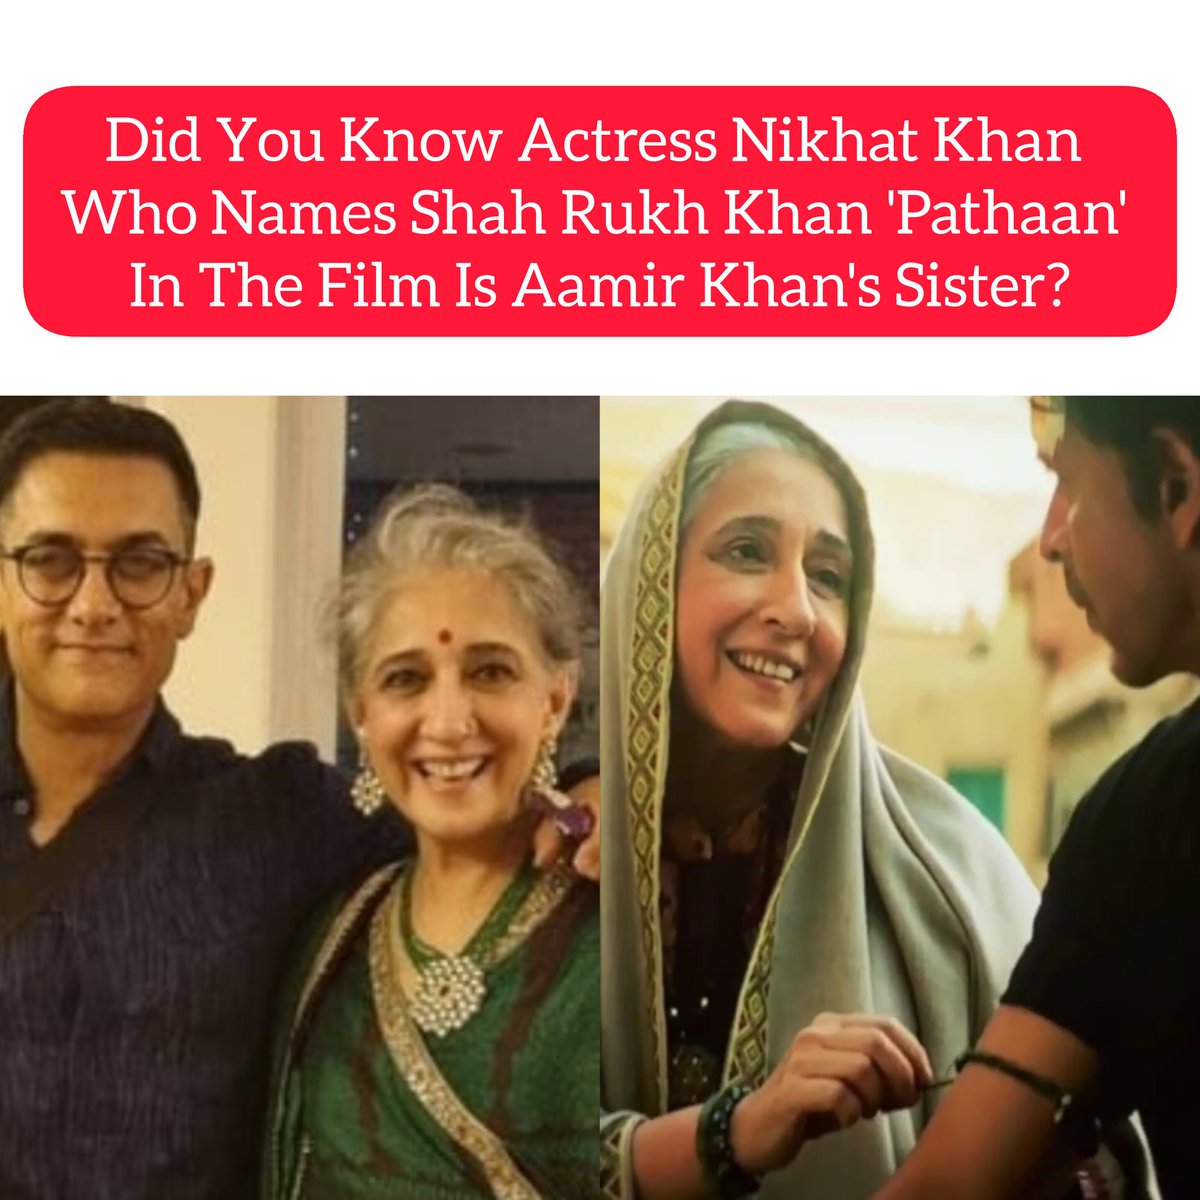 Did you know this? 😮

#ShahRukhKhan #AamirKhan #Pathaan #GlamourAlert